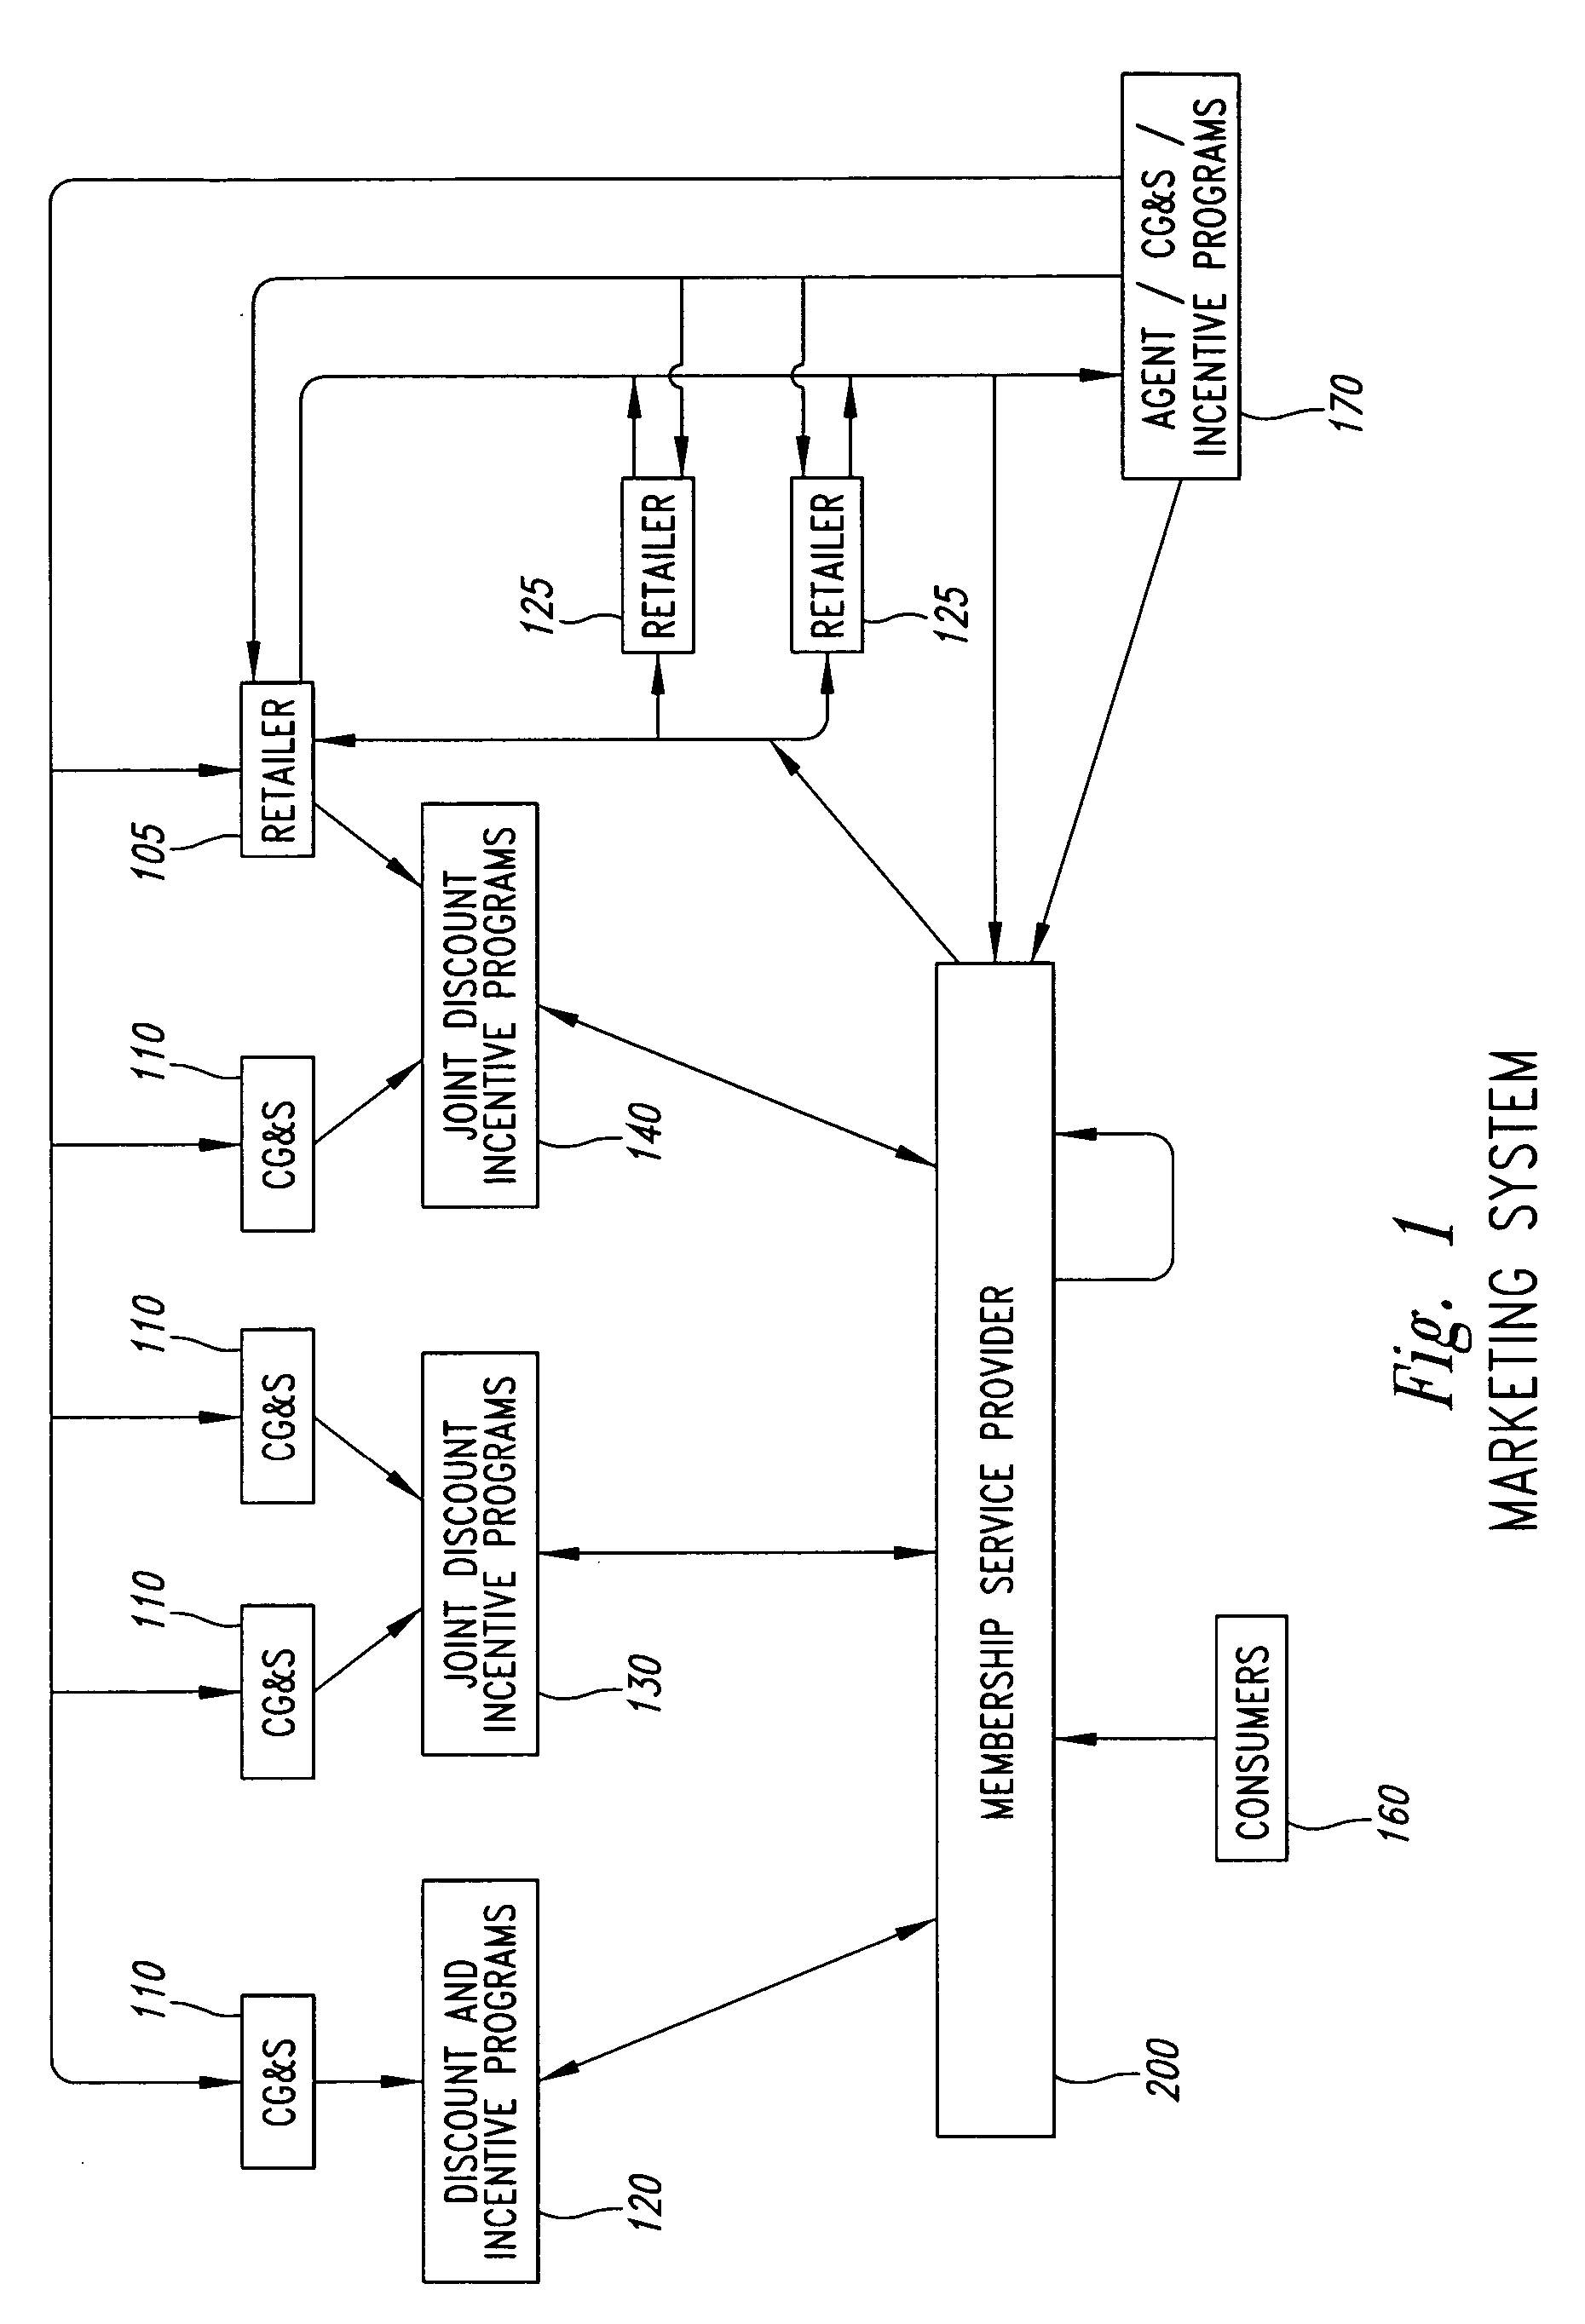 Service provider system and method for marketing programs